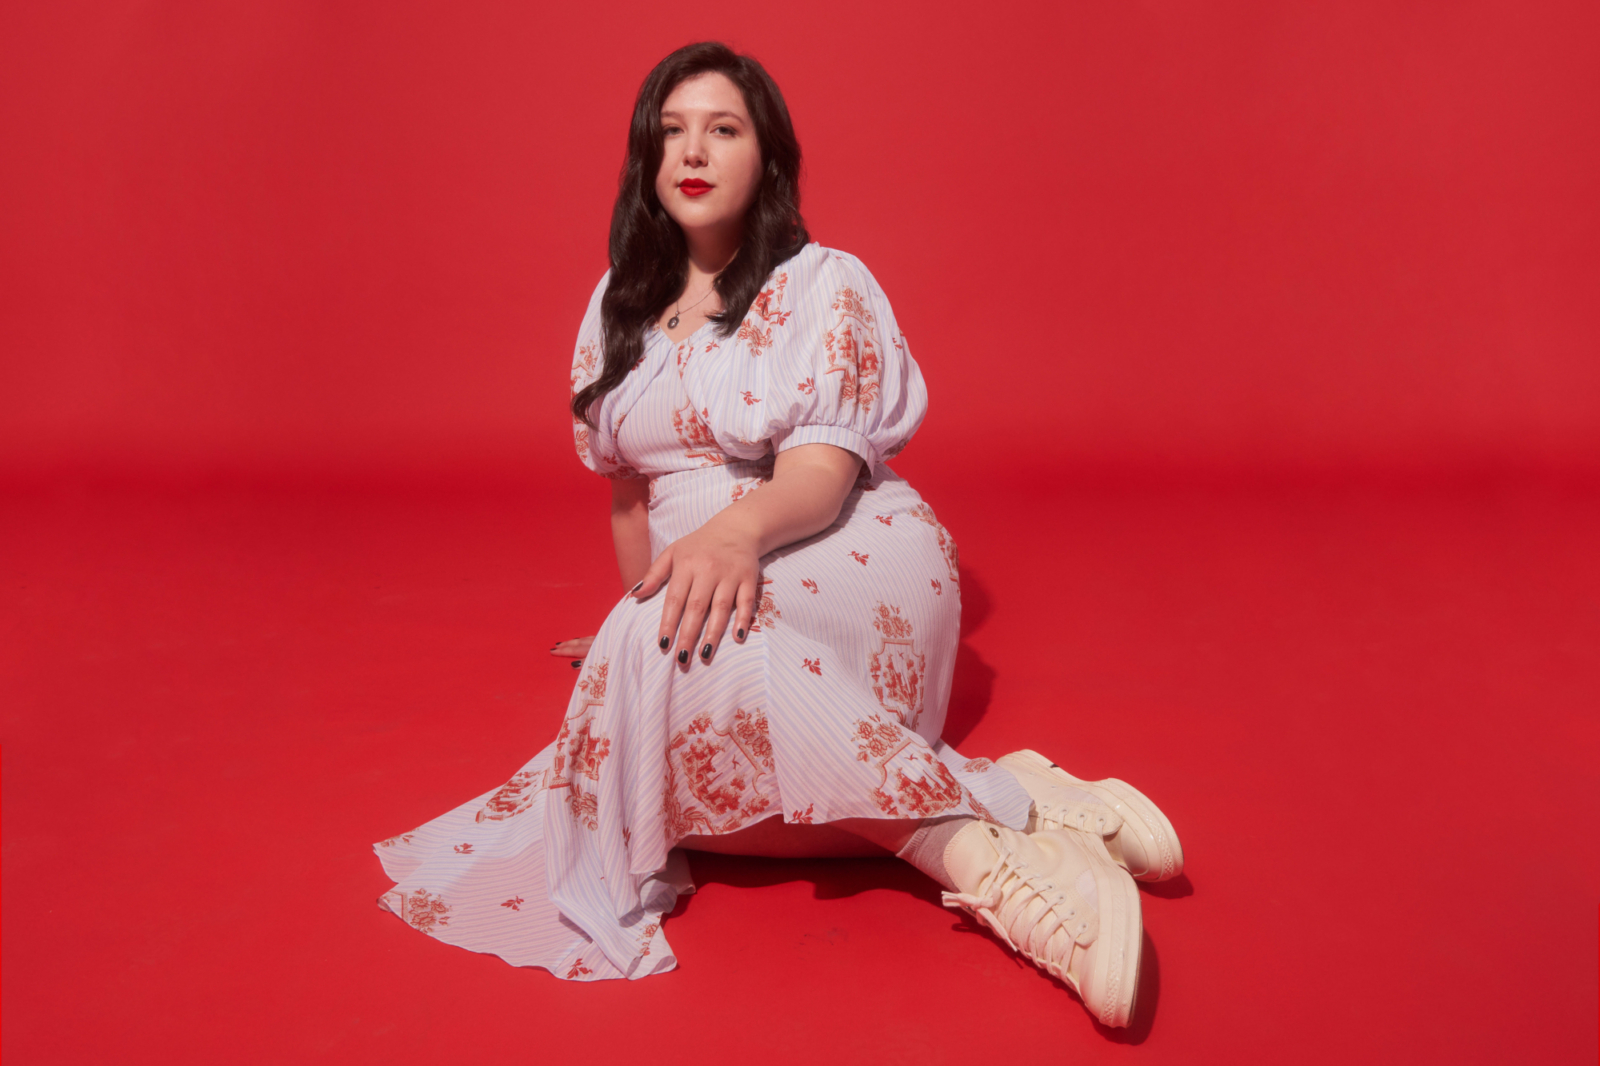 Watch Lucy Dacus perform 'VBS' on The Tonight Show